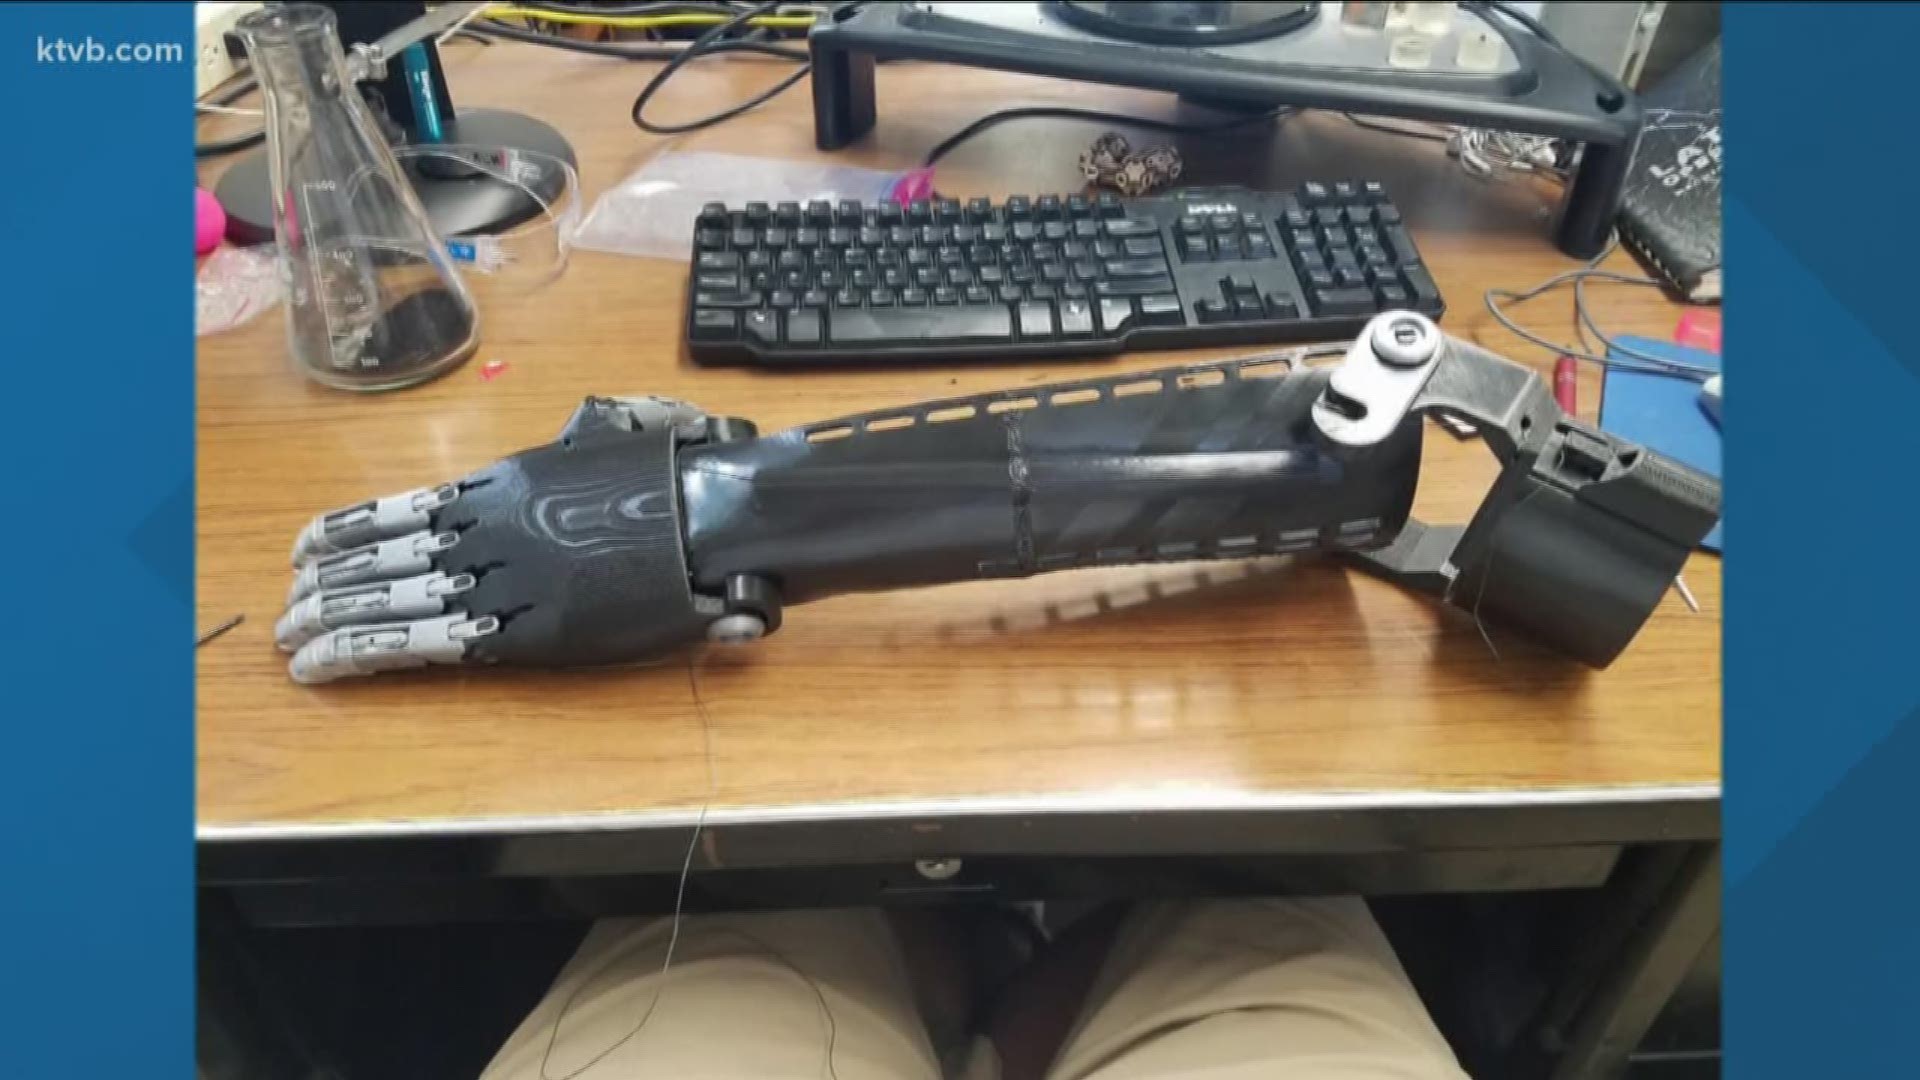 A University of Idaho student made a prosthetic arm using a 3D printer for a childhood friend after he lost half of his left arm in a car accident.